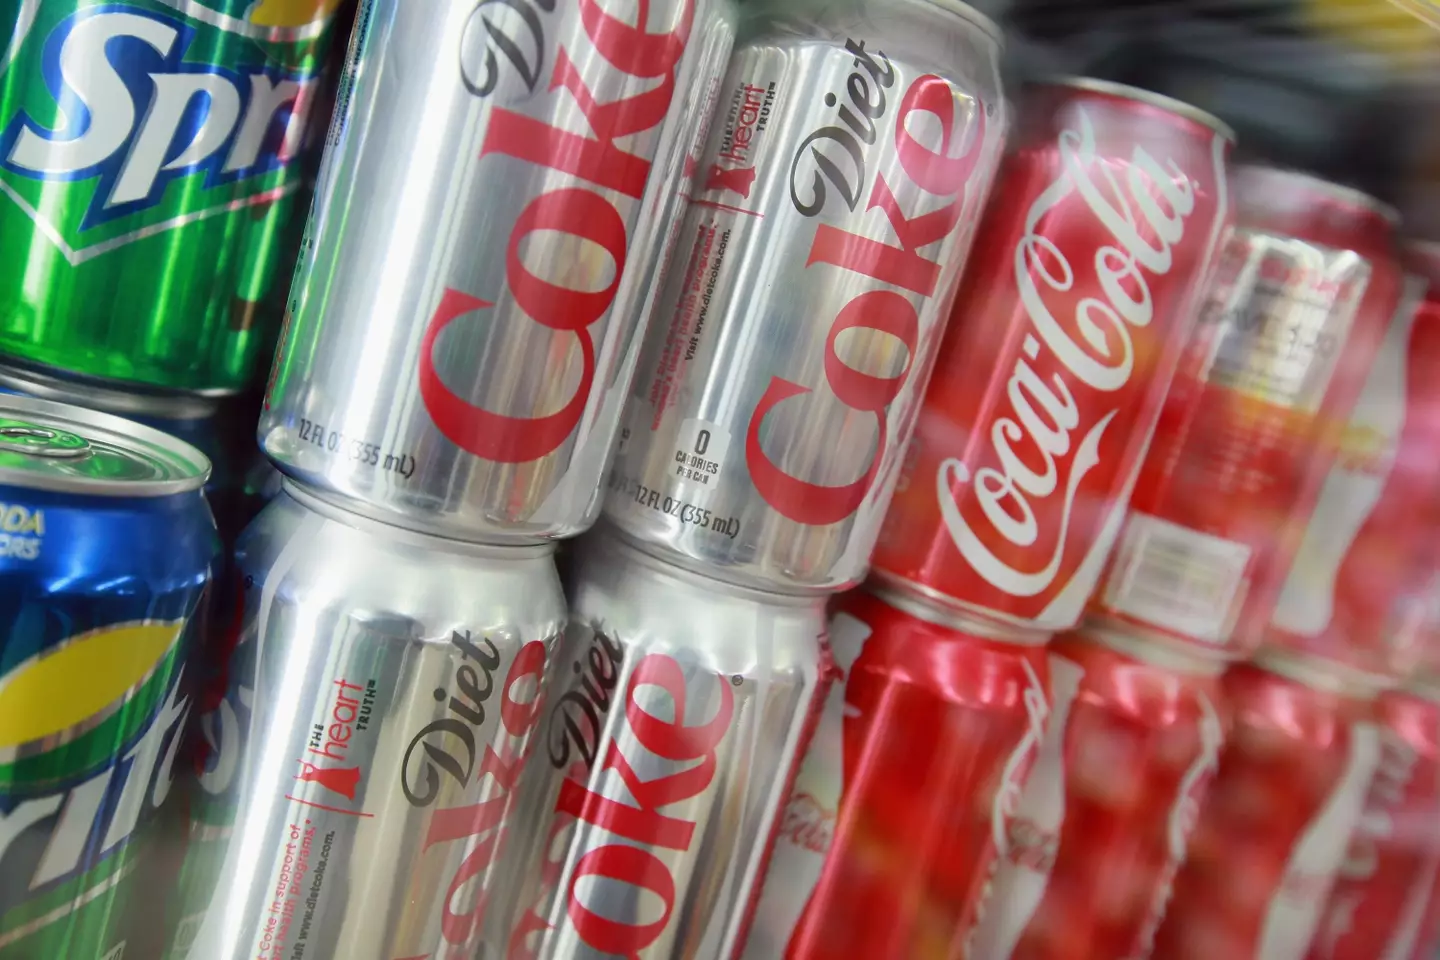 Dr Duane Mellor said that 'high intakes of any soft drinks: can lead to less-healthy food being consumed'.